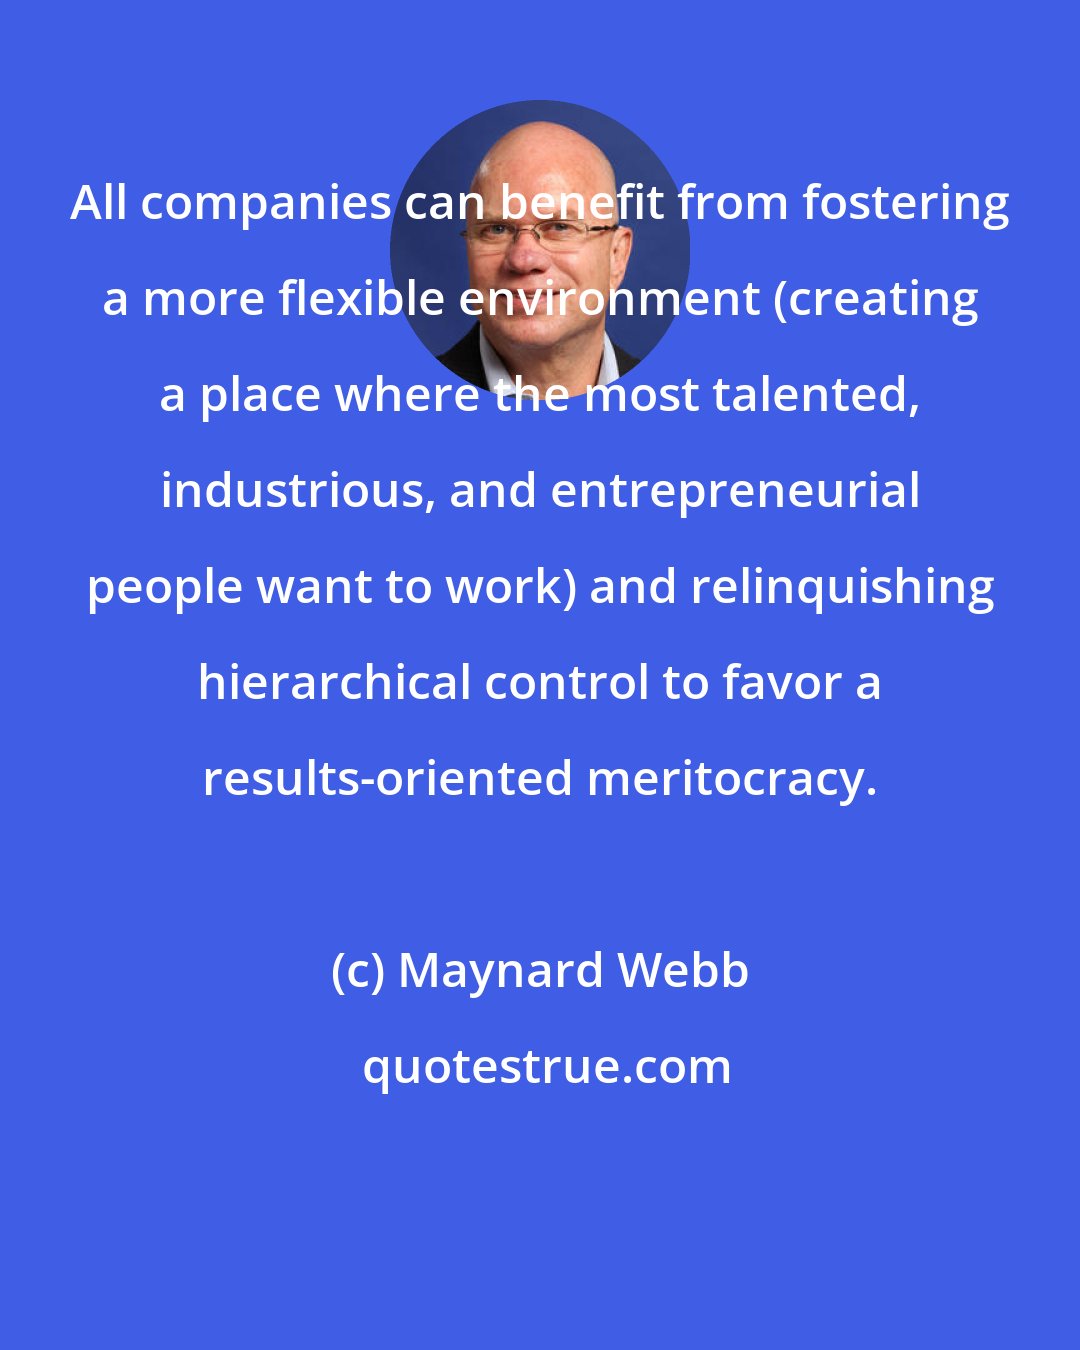 Maynard Webb: All companies can benefit from fostering a more flexible environment (creating a place where the most talented, industrious, and entrepreneurial people want to work) and relinquishing hierarchical control to favor a results-oriented meritocracy.